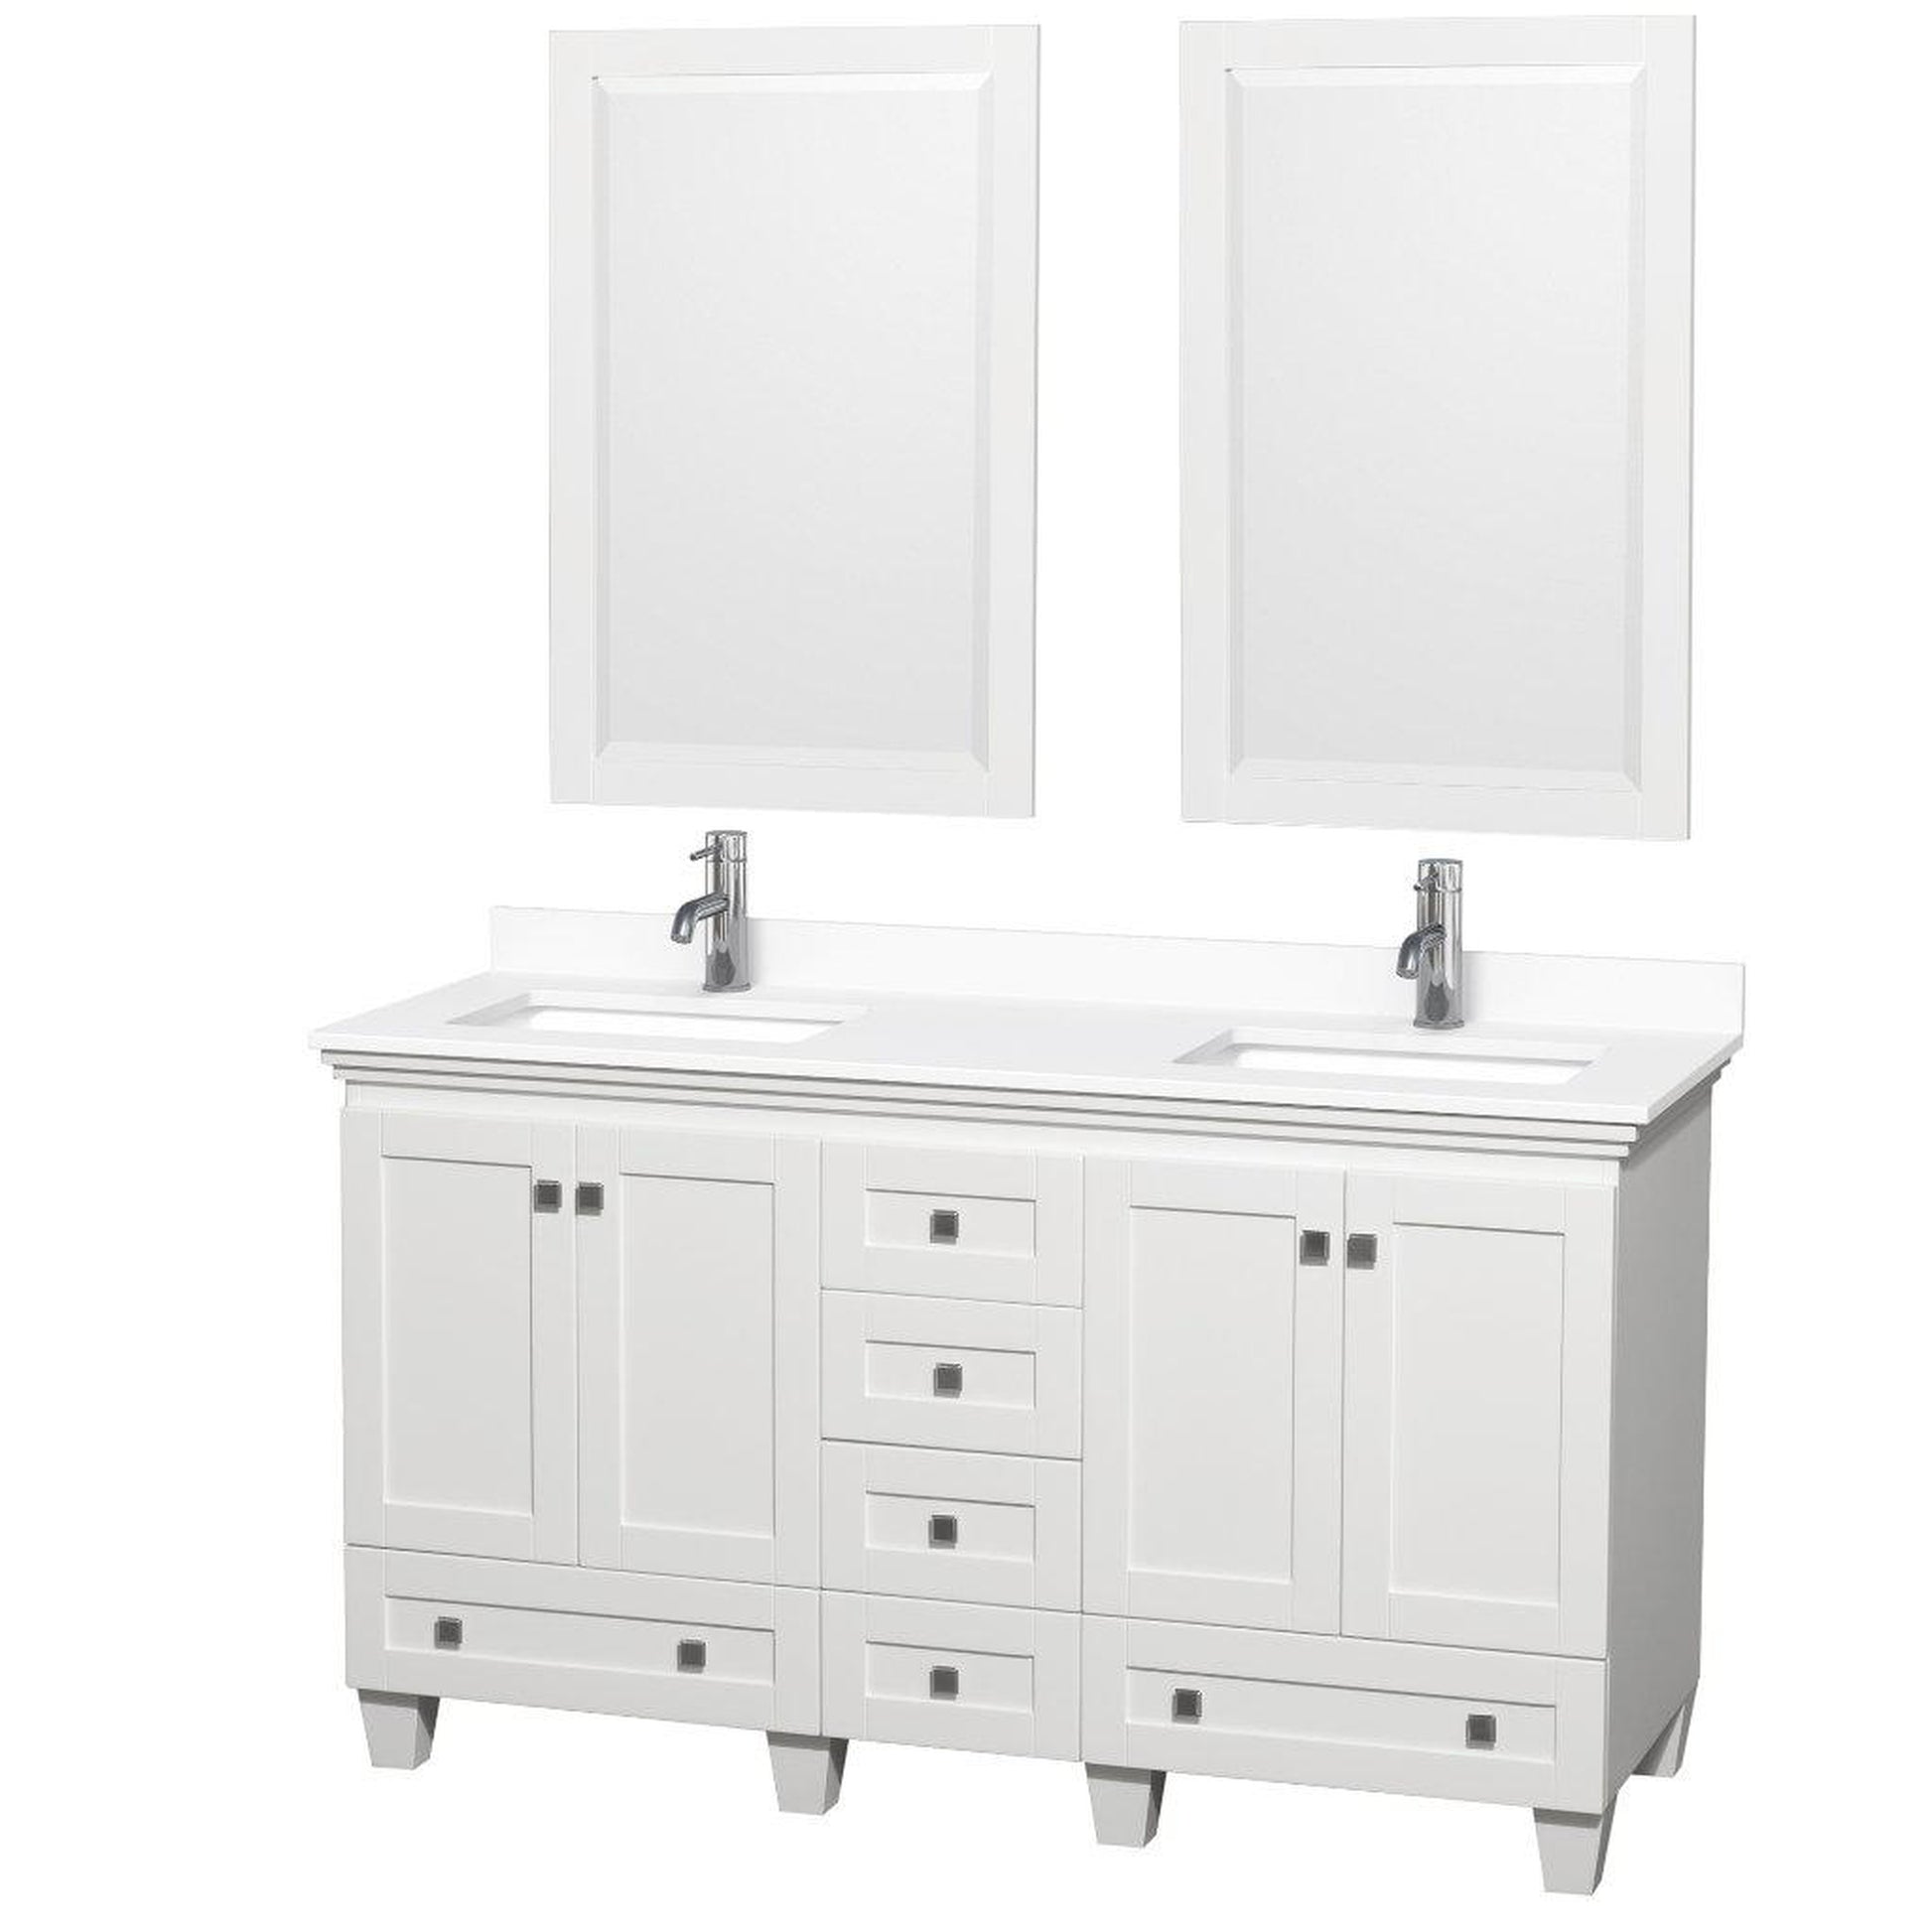 Wyndham Collection Acclaim 60" Double Bathroom White Vanity With White Cultured Marble Countertop And Undermount Square Sinks And 2 Set Of 24" Mirror